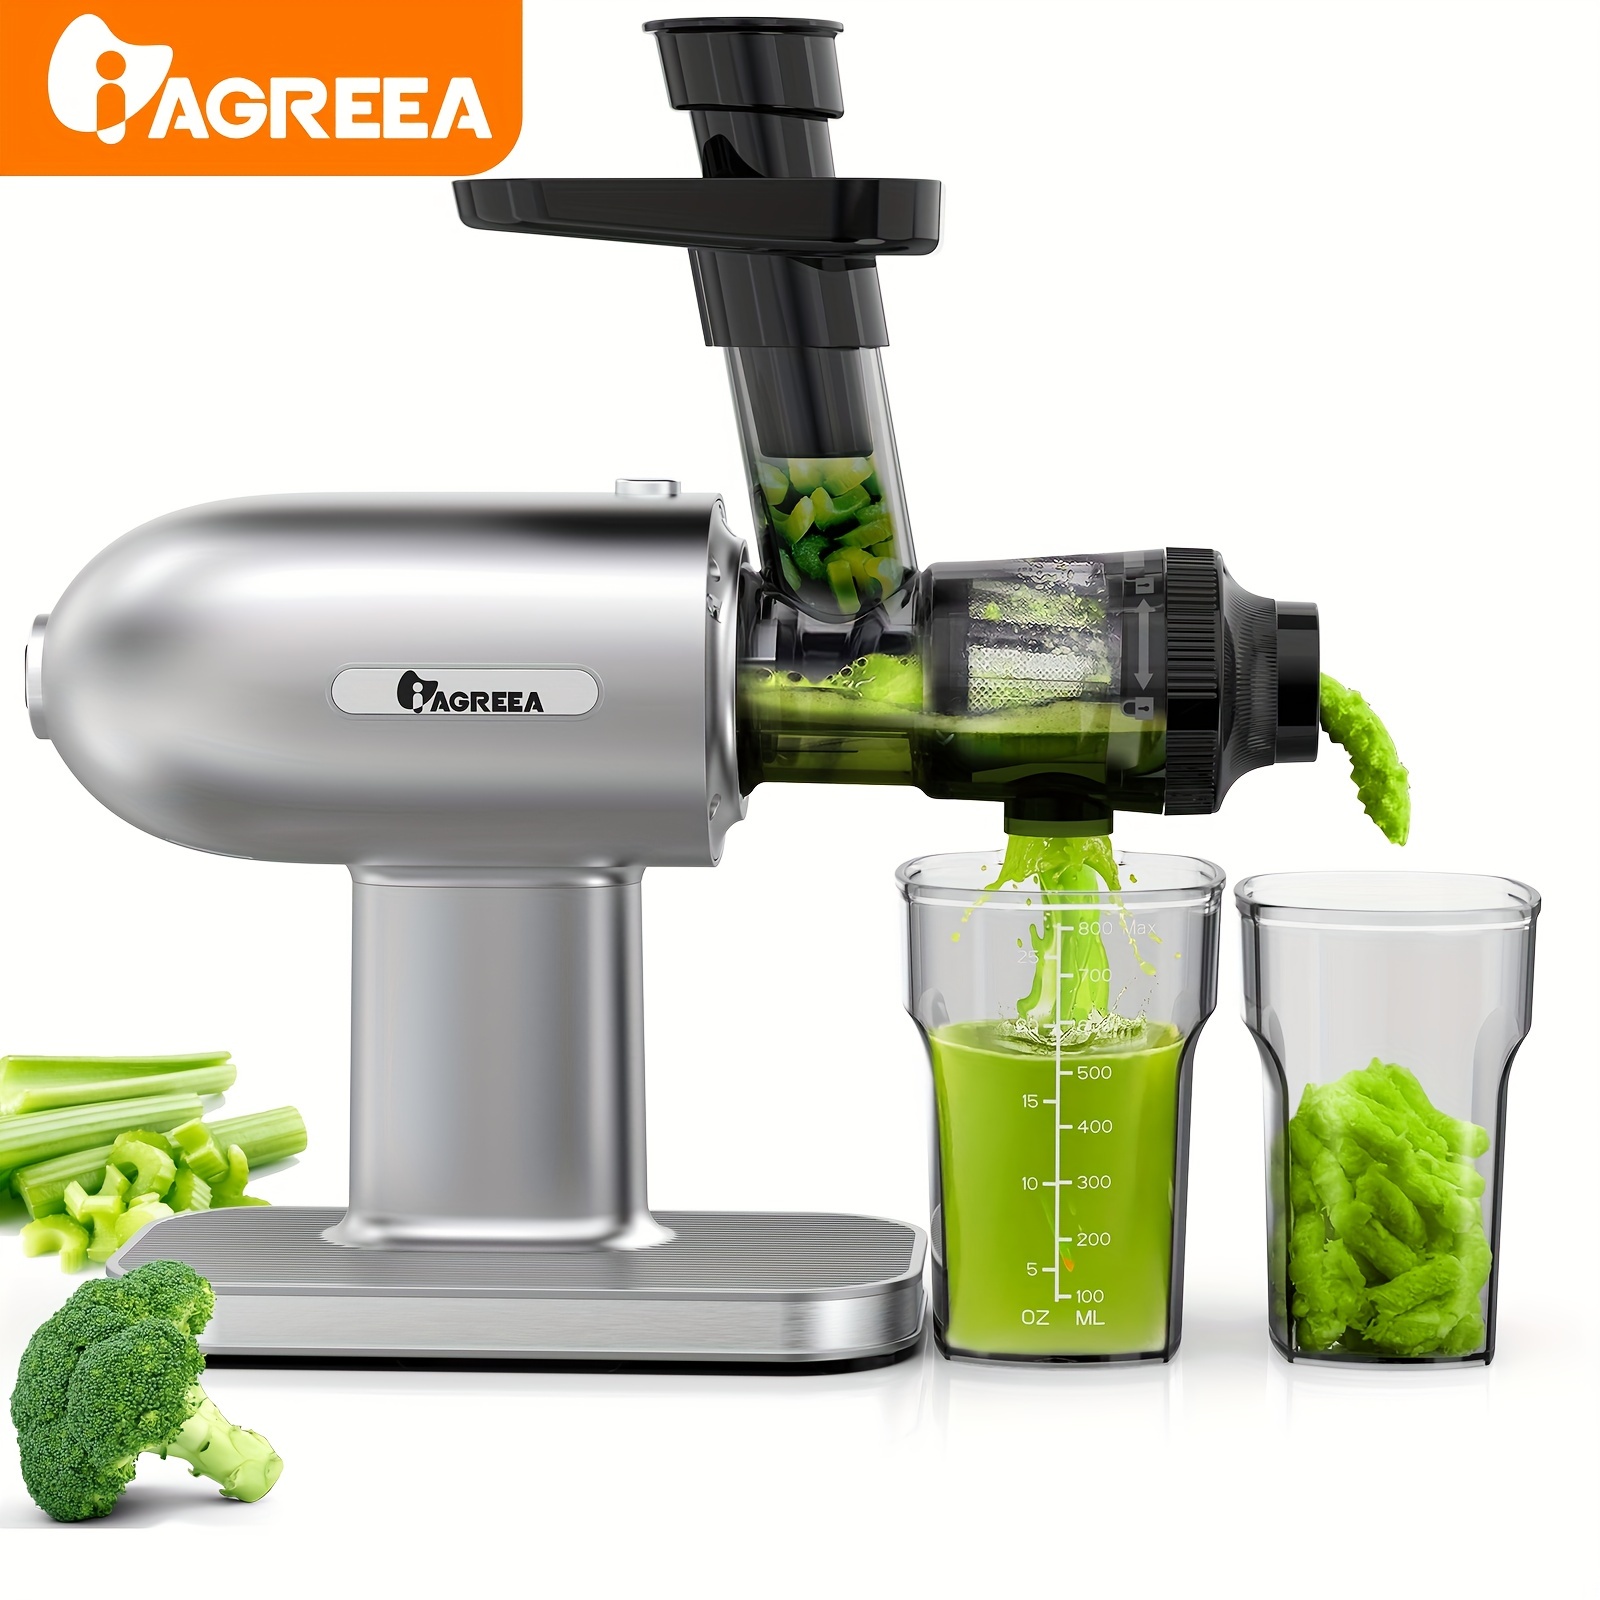 iagreea cold press juicer slow juicer machines for vegetable and fruit compact small space saving masticating juicer ultra power juicer maker with reverse function details 1